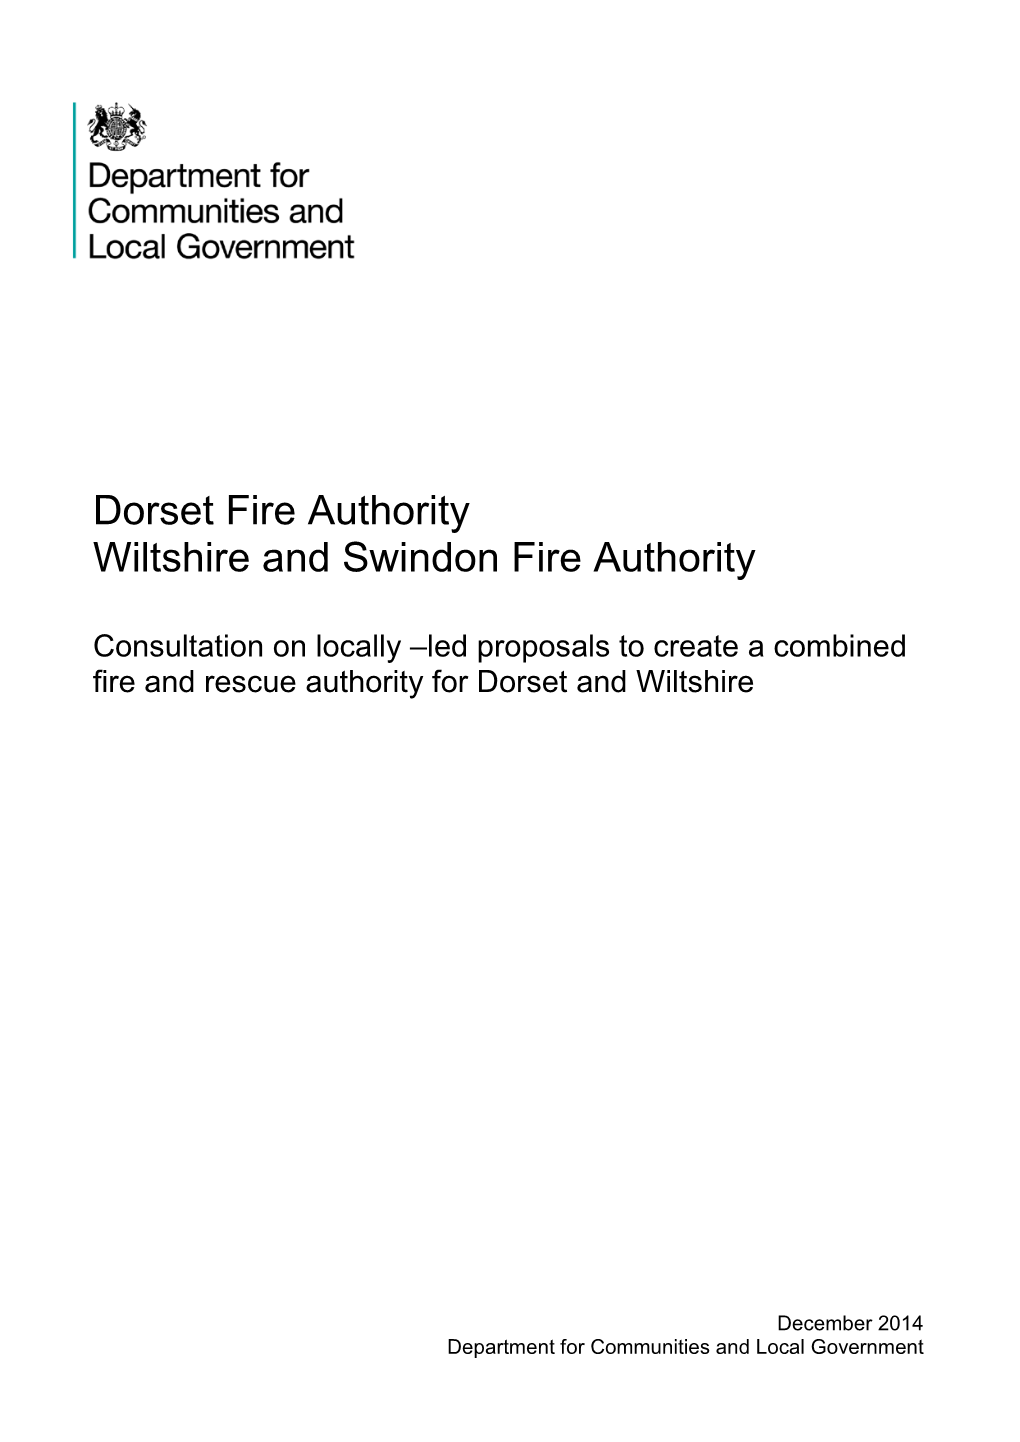 Dorset Fire Authority Wiltshire and Swindon Fire Authority